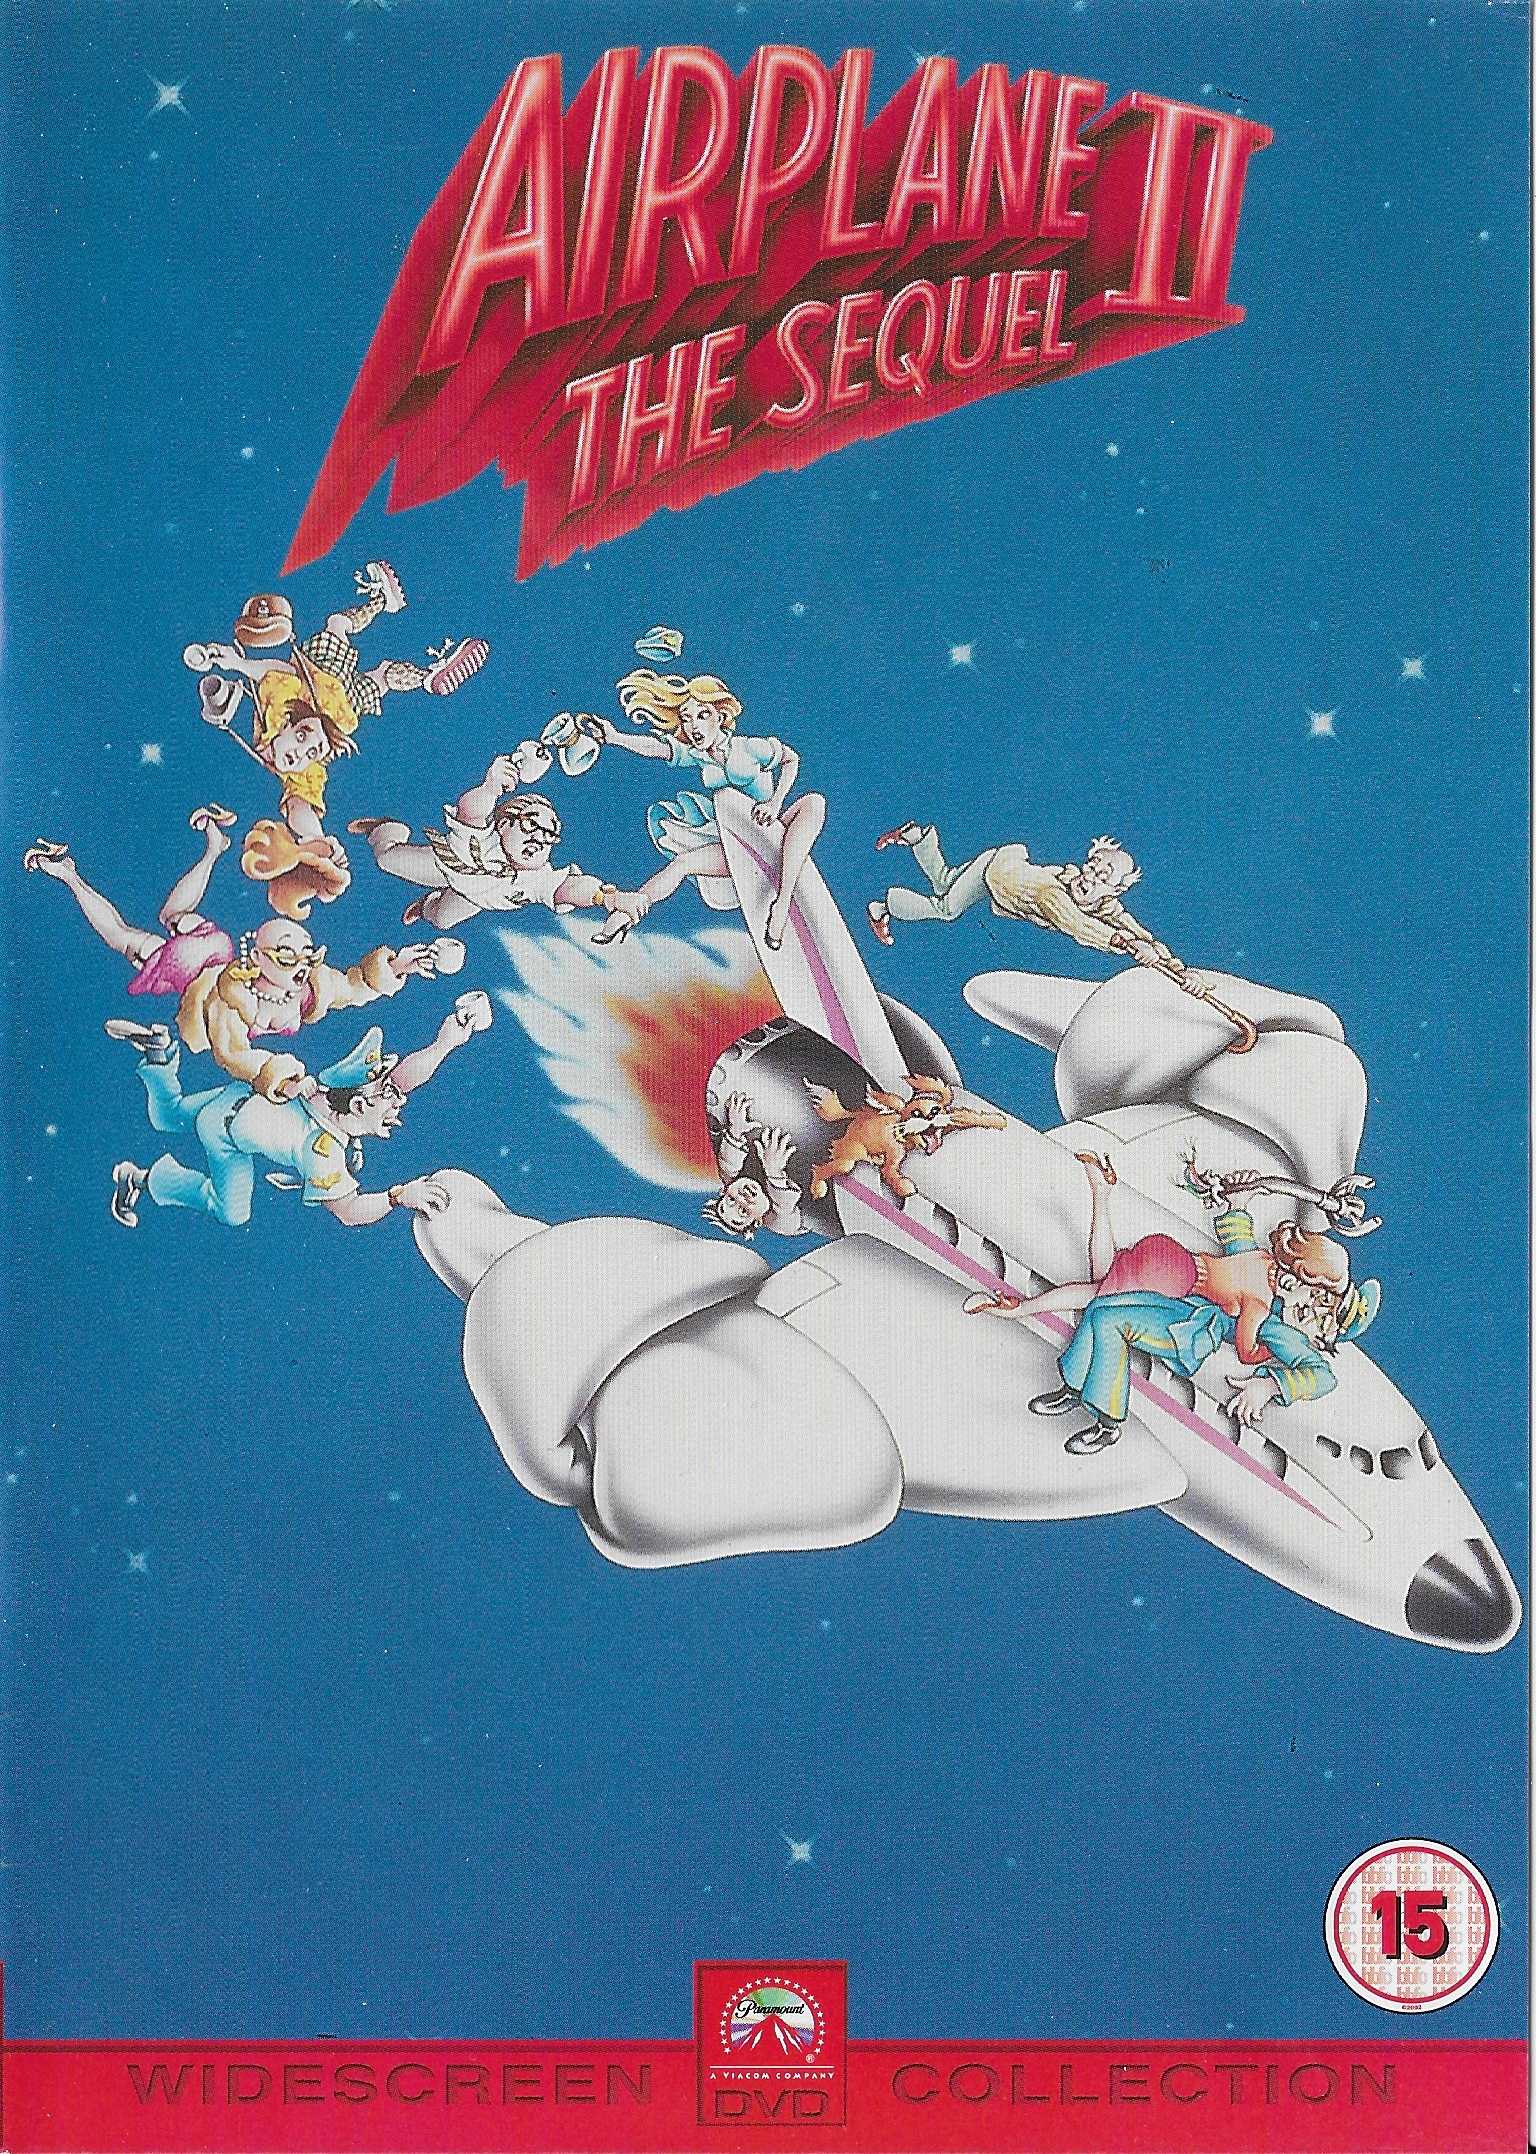 Picture of Airplane II - The sequel by artist Ken Finkleman from ITV, Channel 4 and Channel 5 dvds library